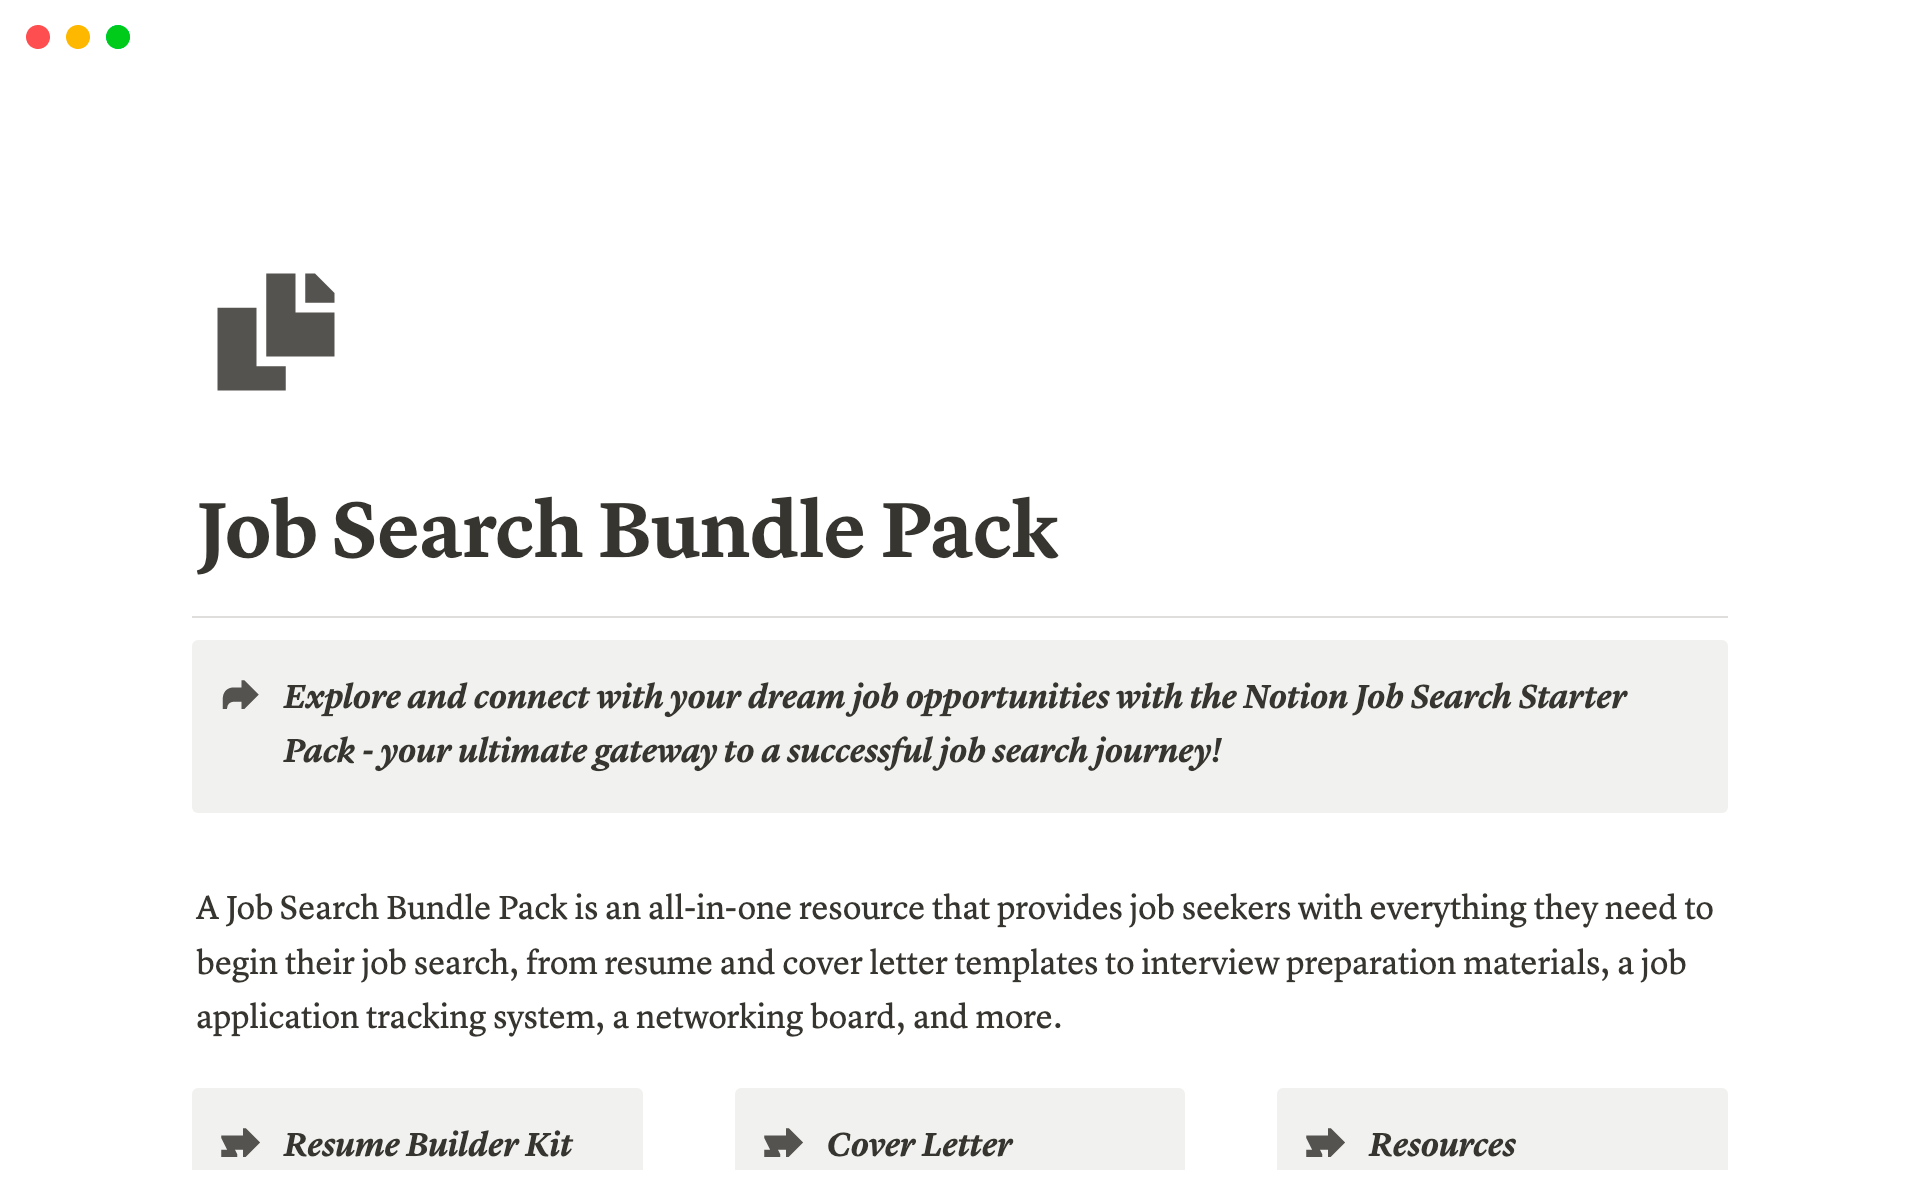 Notion Job Search Bundle Pack consists of a comprehensive suite of features to make your job search easier and more efficient.